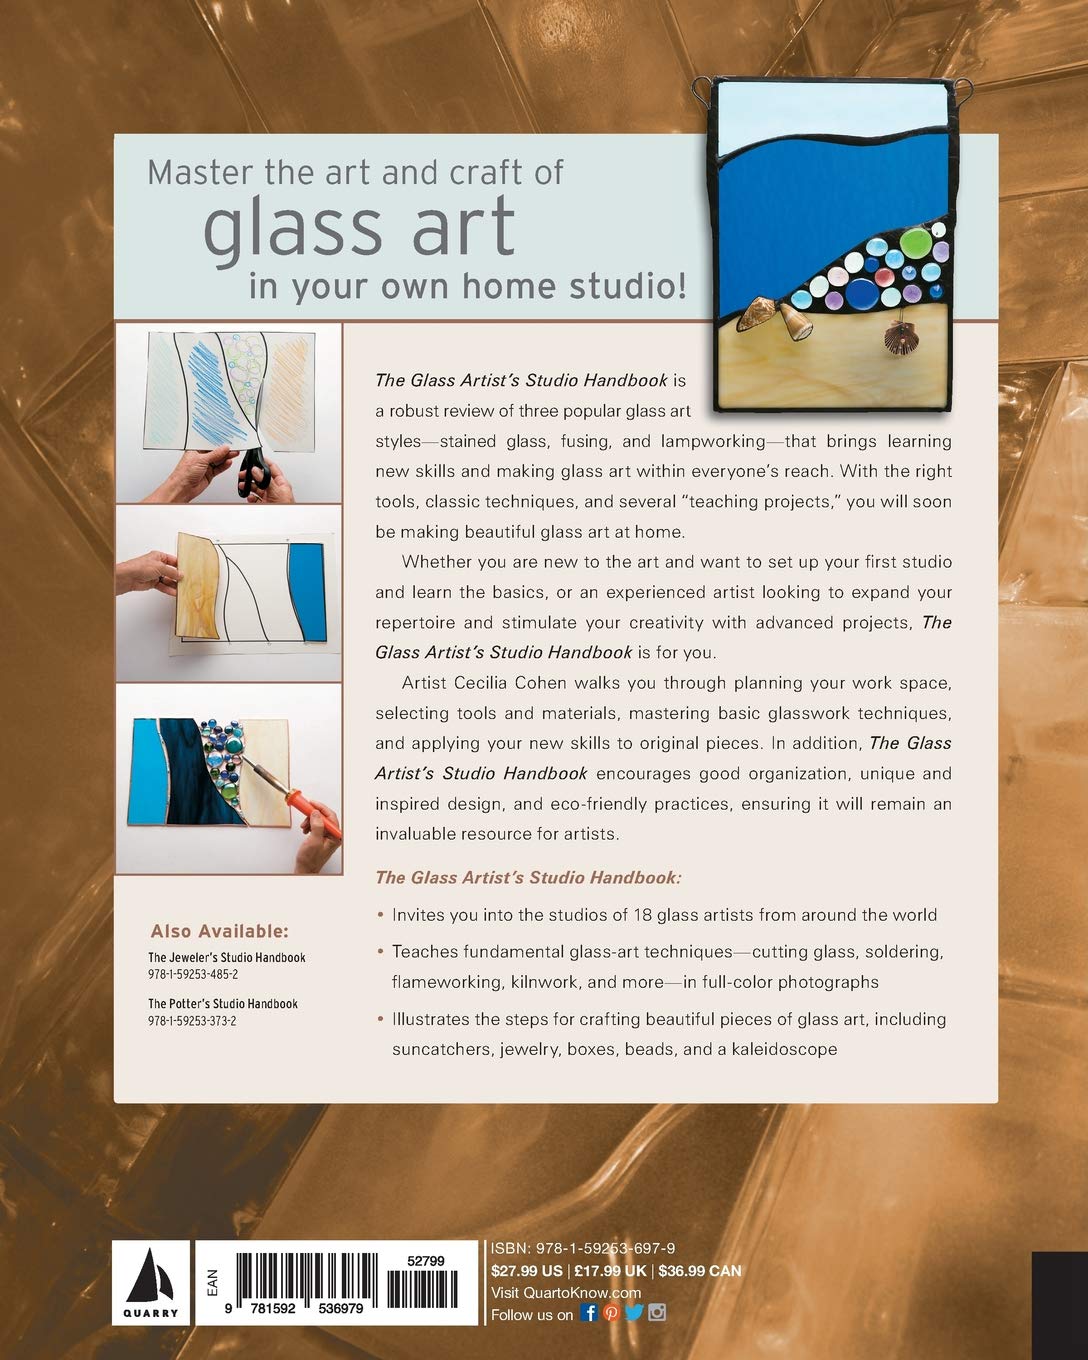 The Glass Artist's Studio Handbook: Traditional and Contemporary Techniques for Working with Glass (Cecilia Cohen)